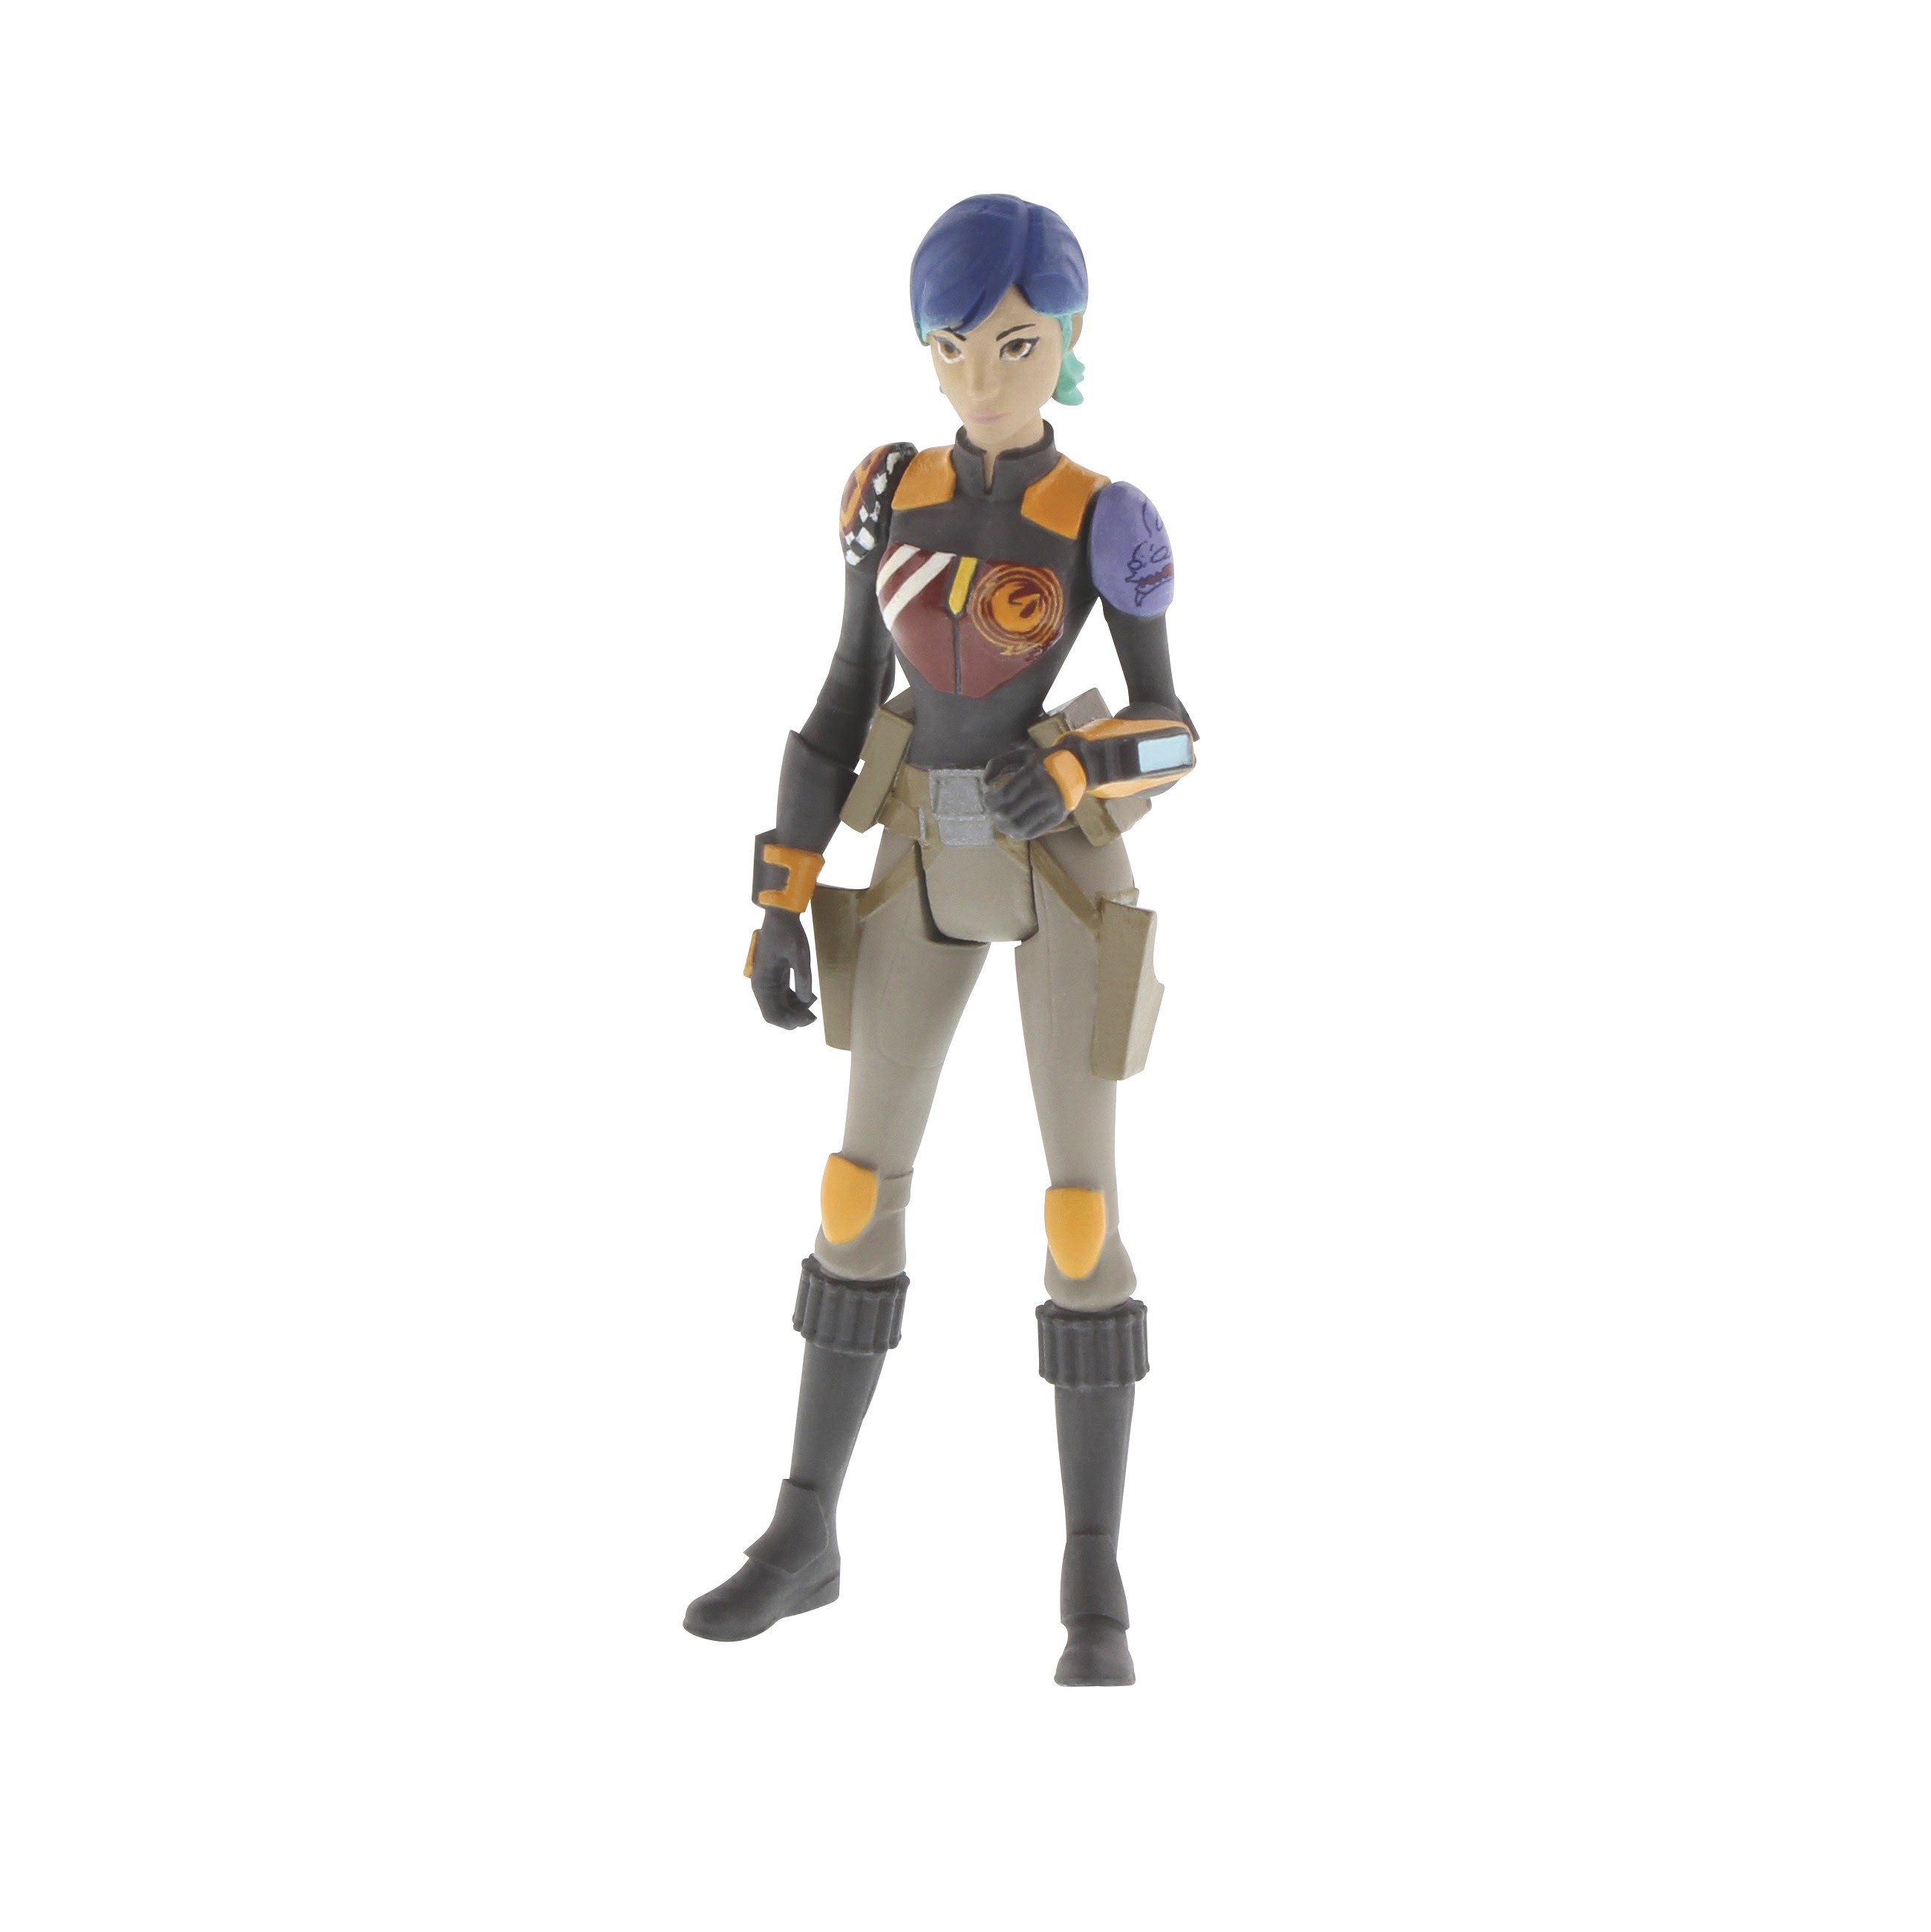 Sabine2 Large 300DPI Large Batch of Hasbro Marvel & Star Wars Figure Images From Toy Fair